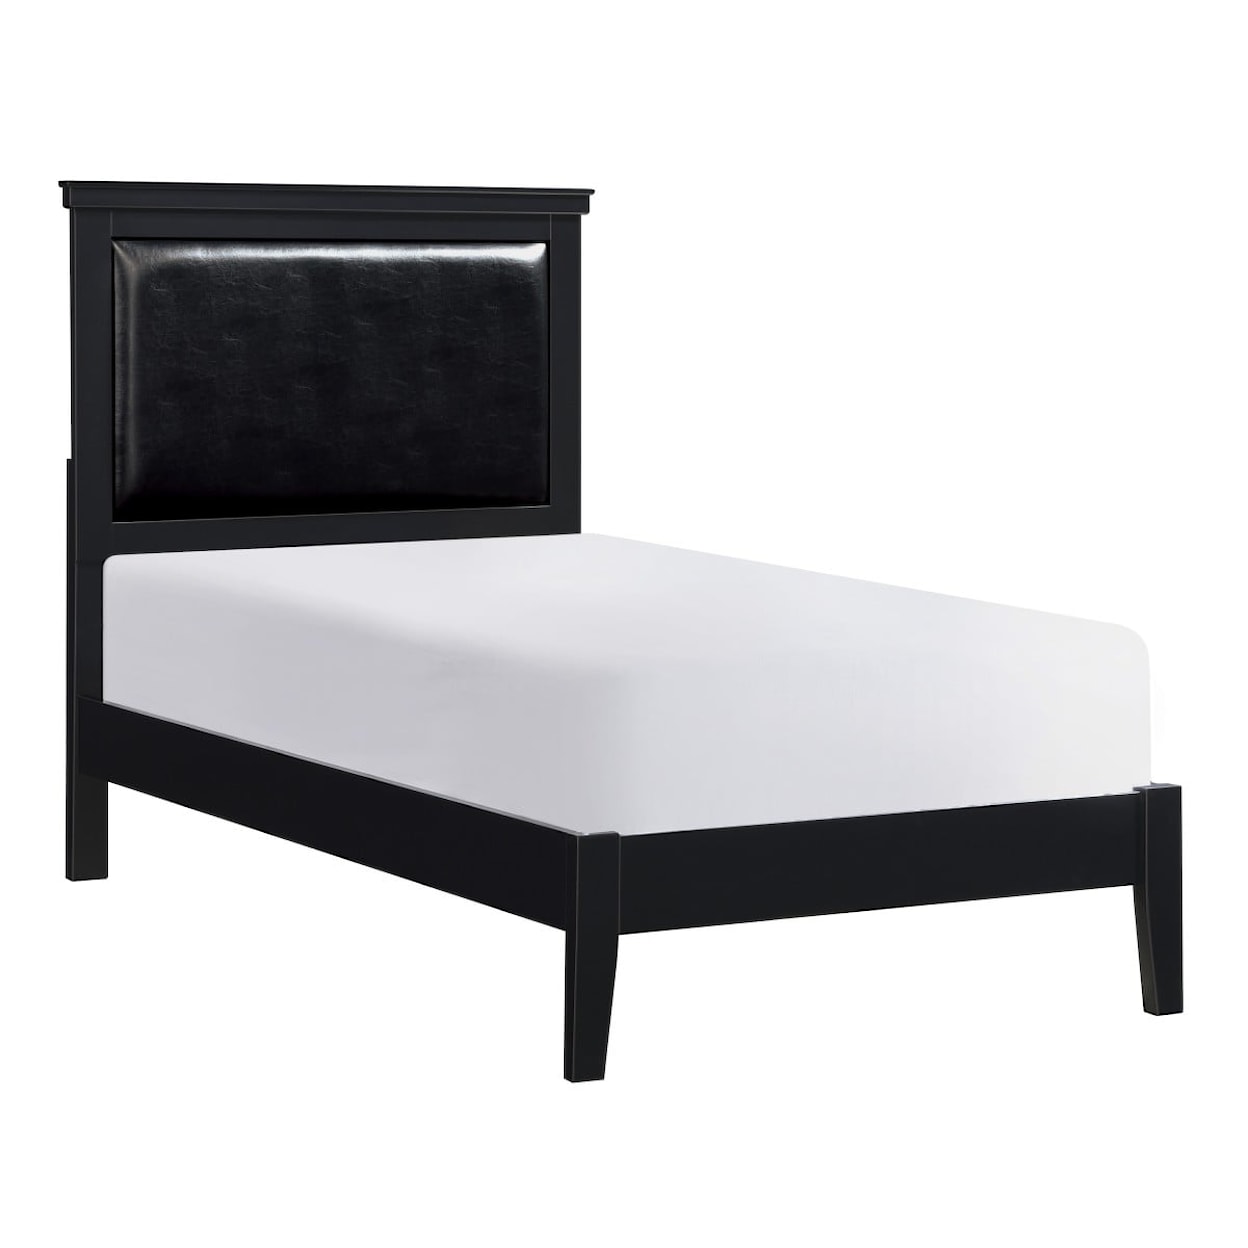 Homelegance Seabright Twin Bed